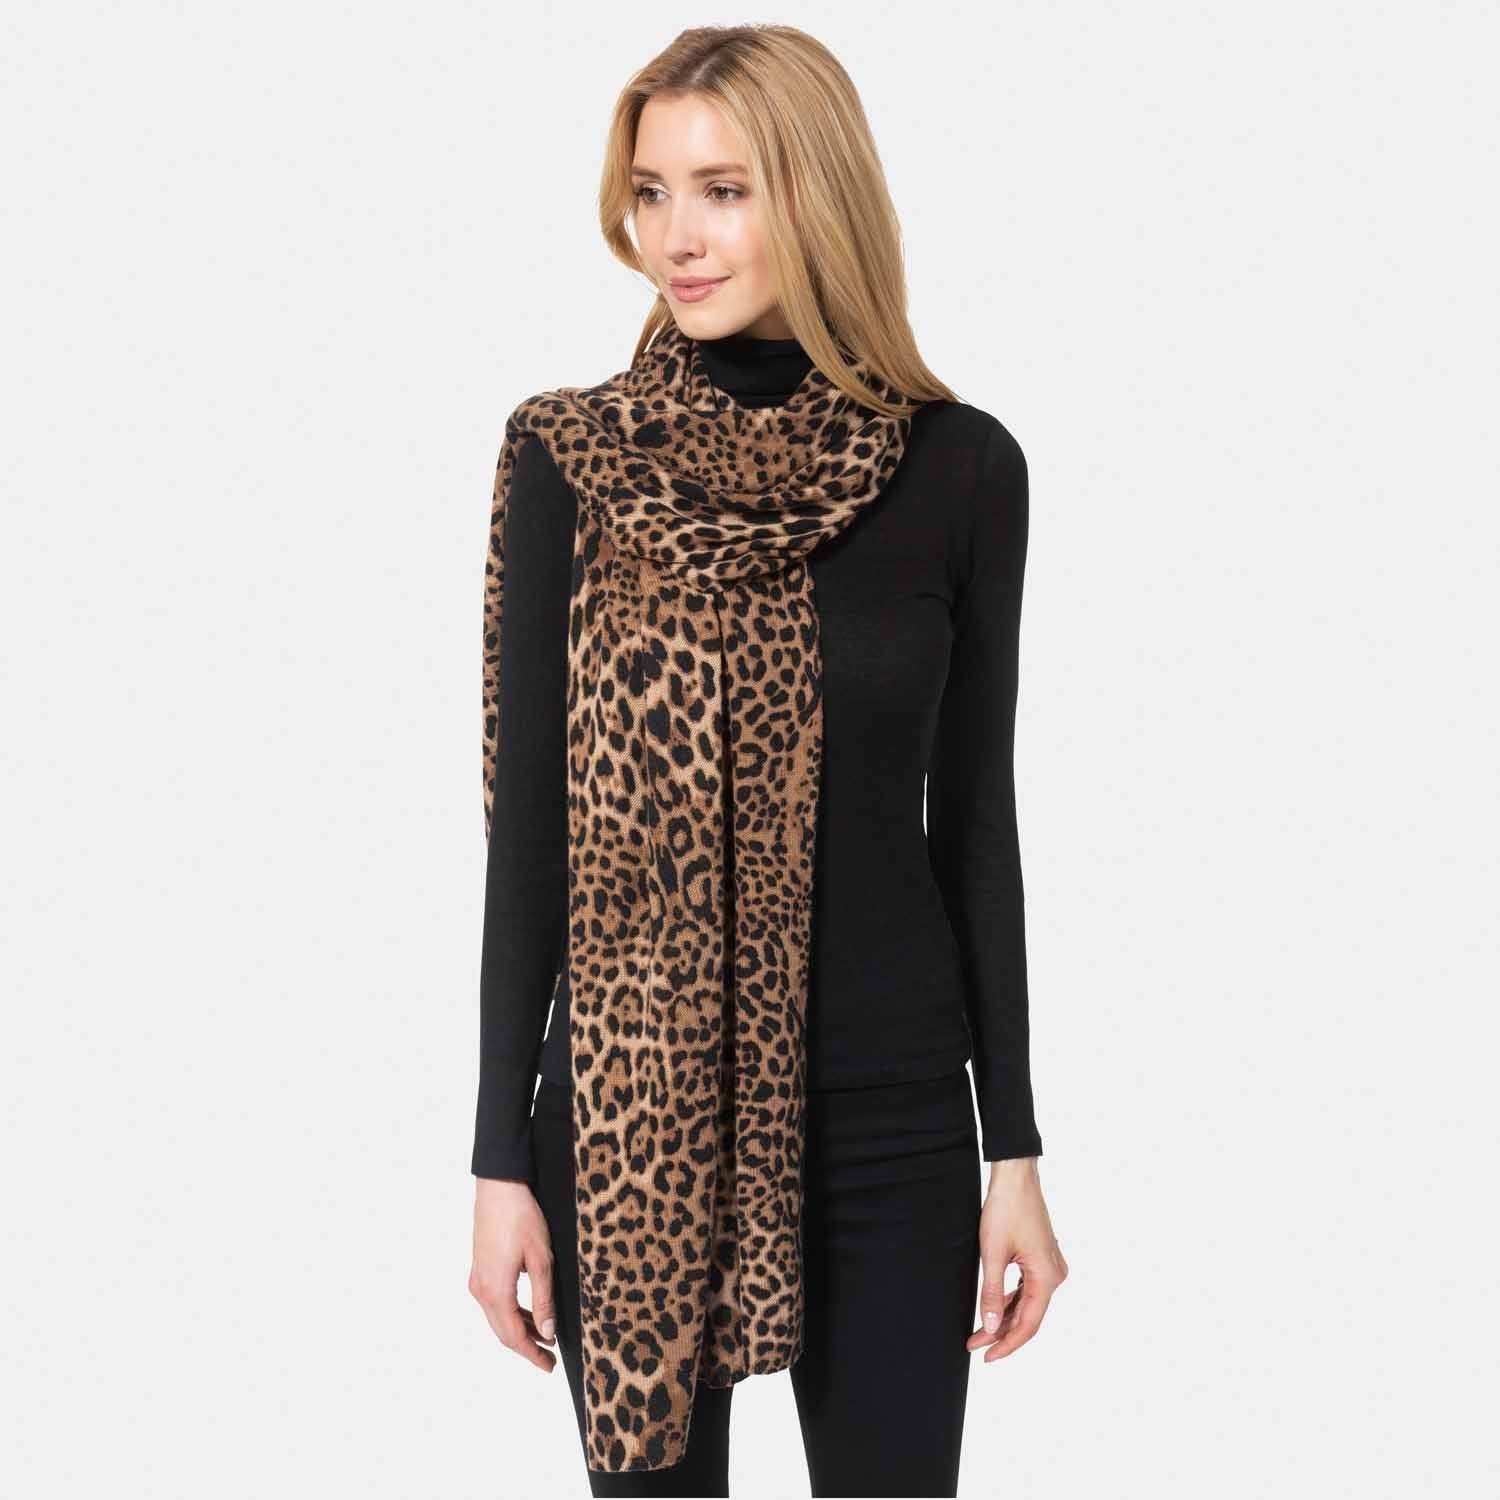 Trendy + Unique Scarves, Orders $75+ Ship Free